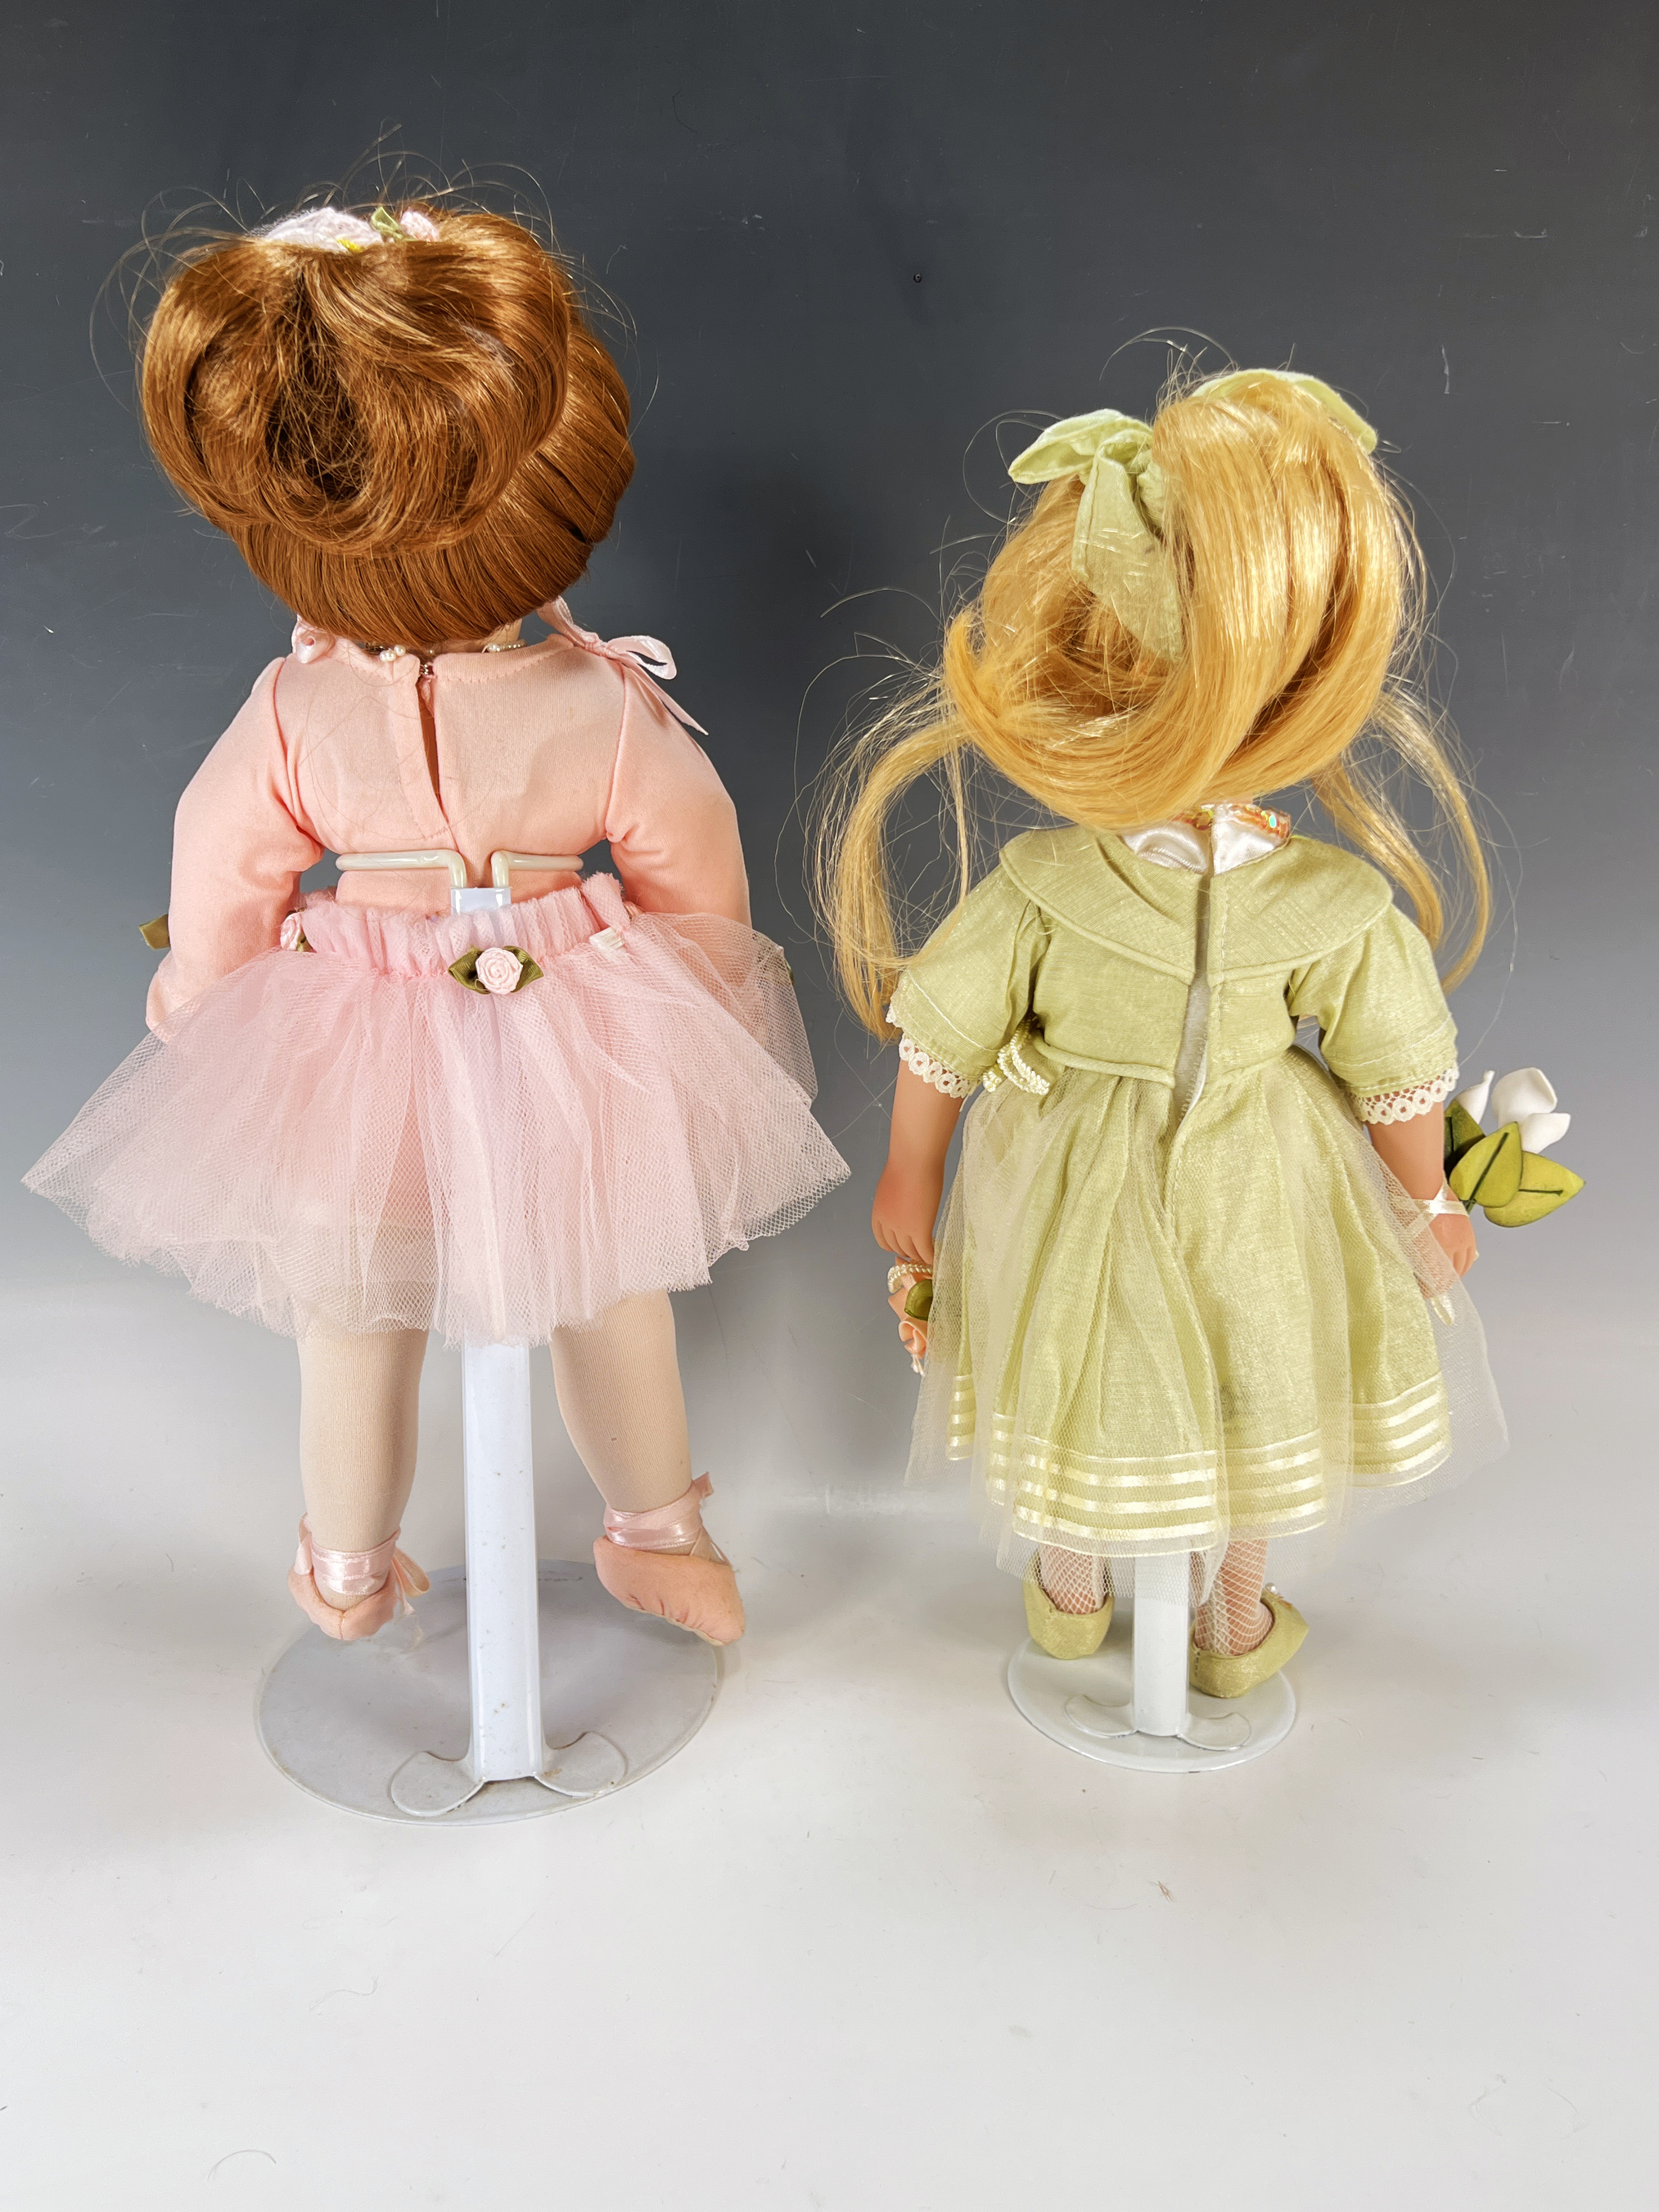 Porcelain Ballerina Doll And Doll In Green Dress image 2